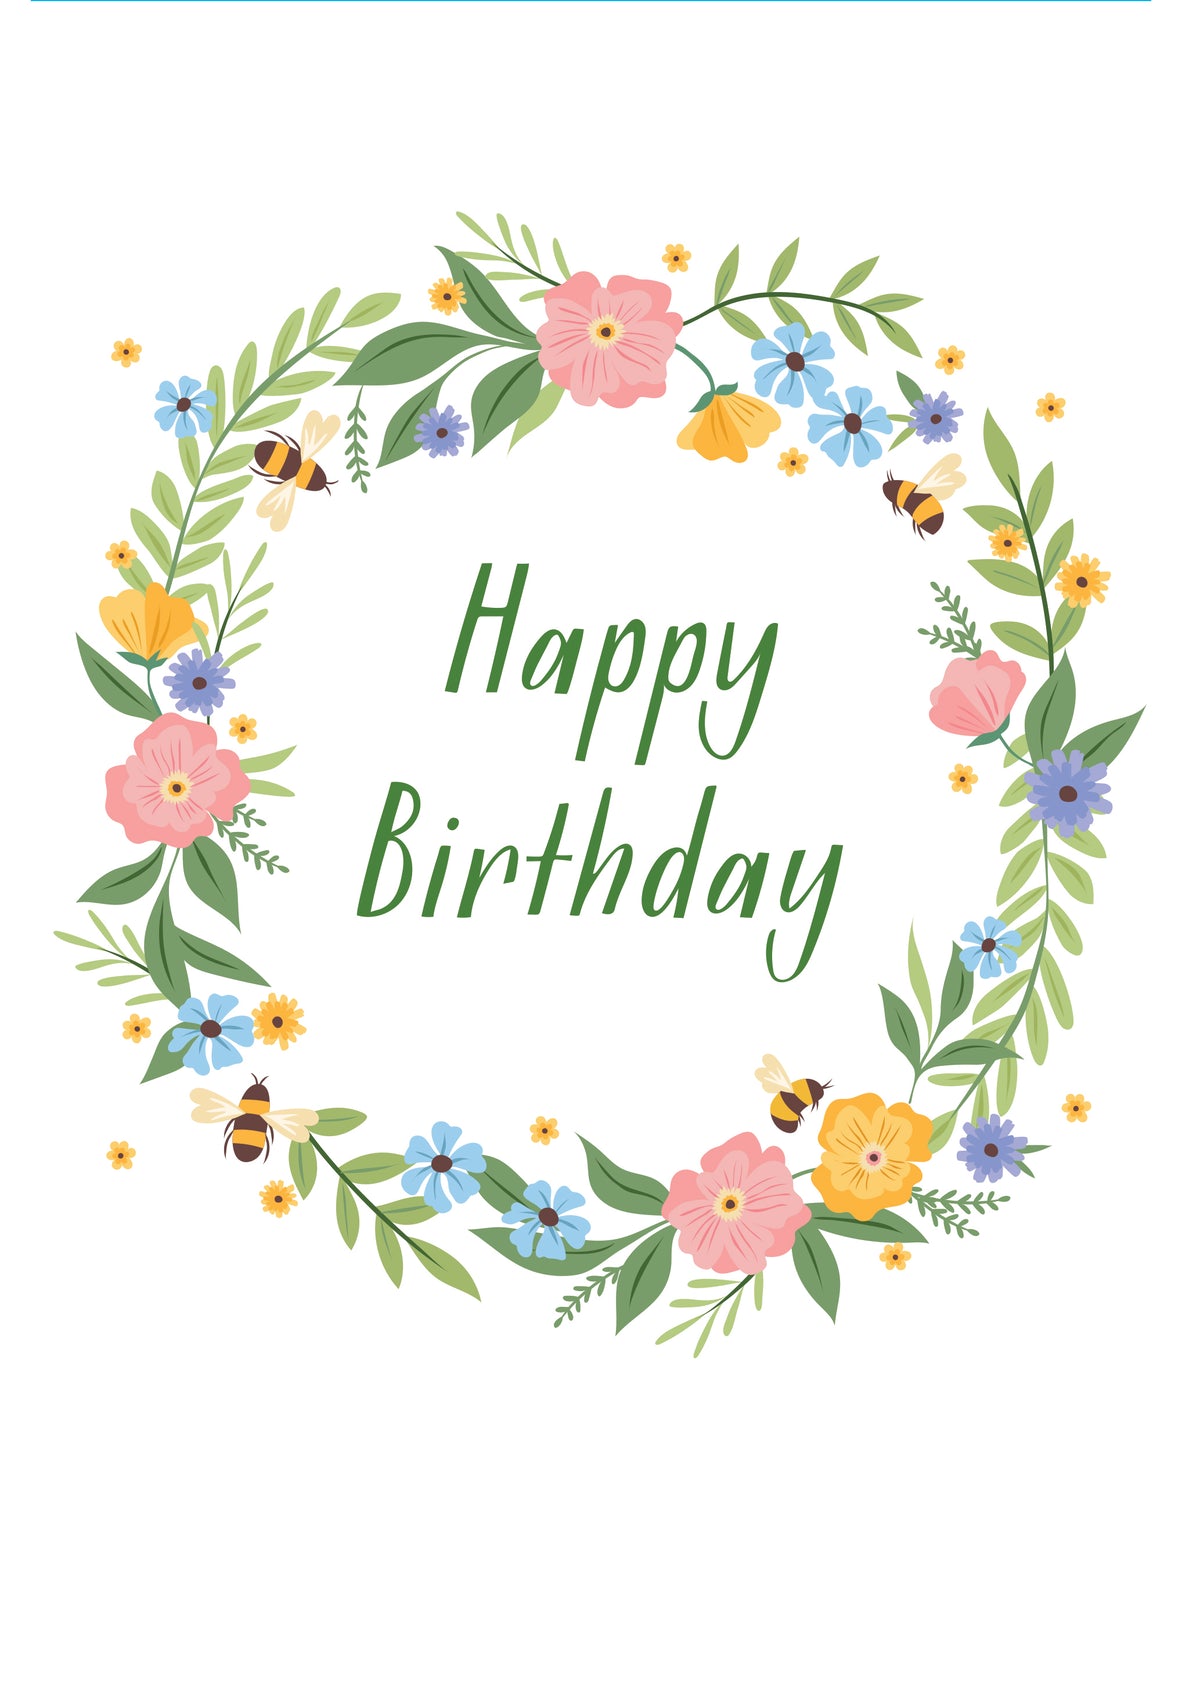 A greetings card with a white background and colourful floral wreath. The words happy birthday are written in the centre in green script.